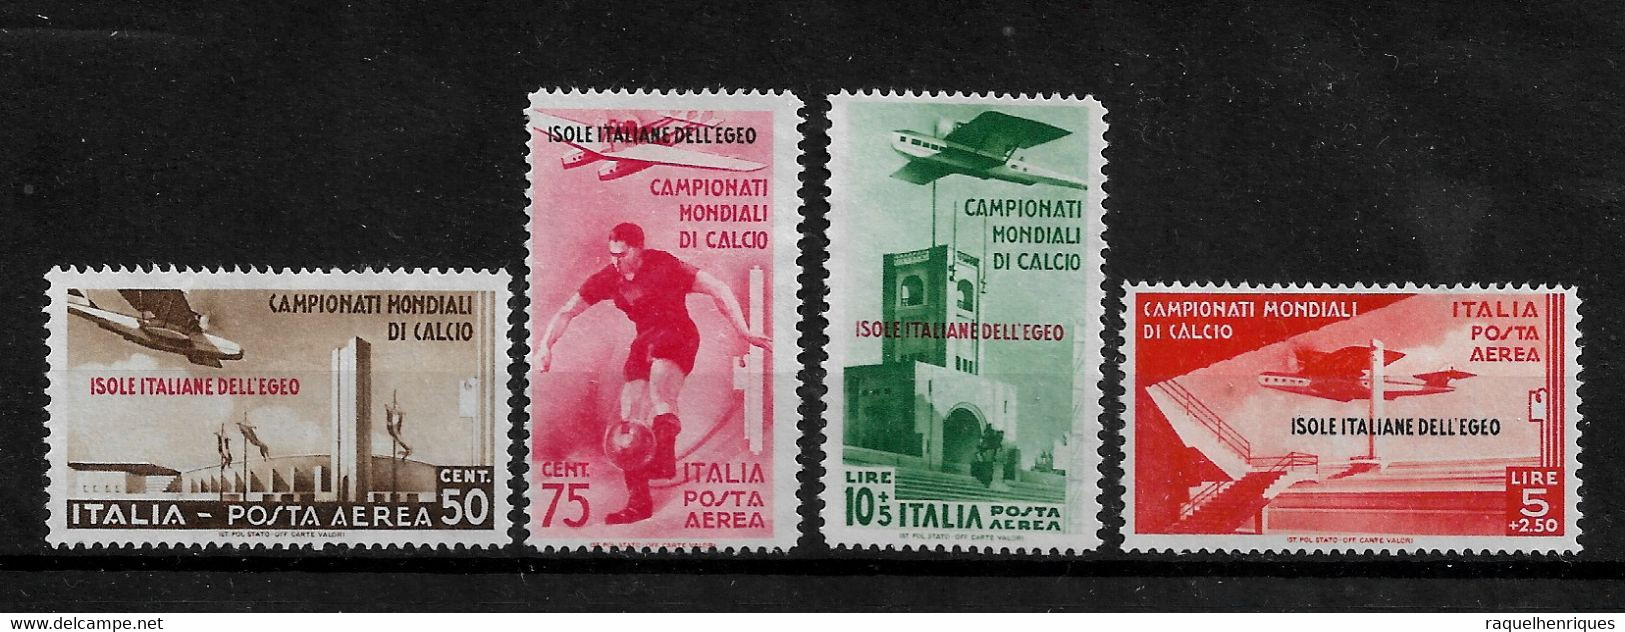 ITALY STAMP - AEGEAN ISLANDS - 1934 Airmail - Football World Cup SET M NG (BA5#108) - Egeo (Amministrazione Autonoma)